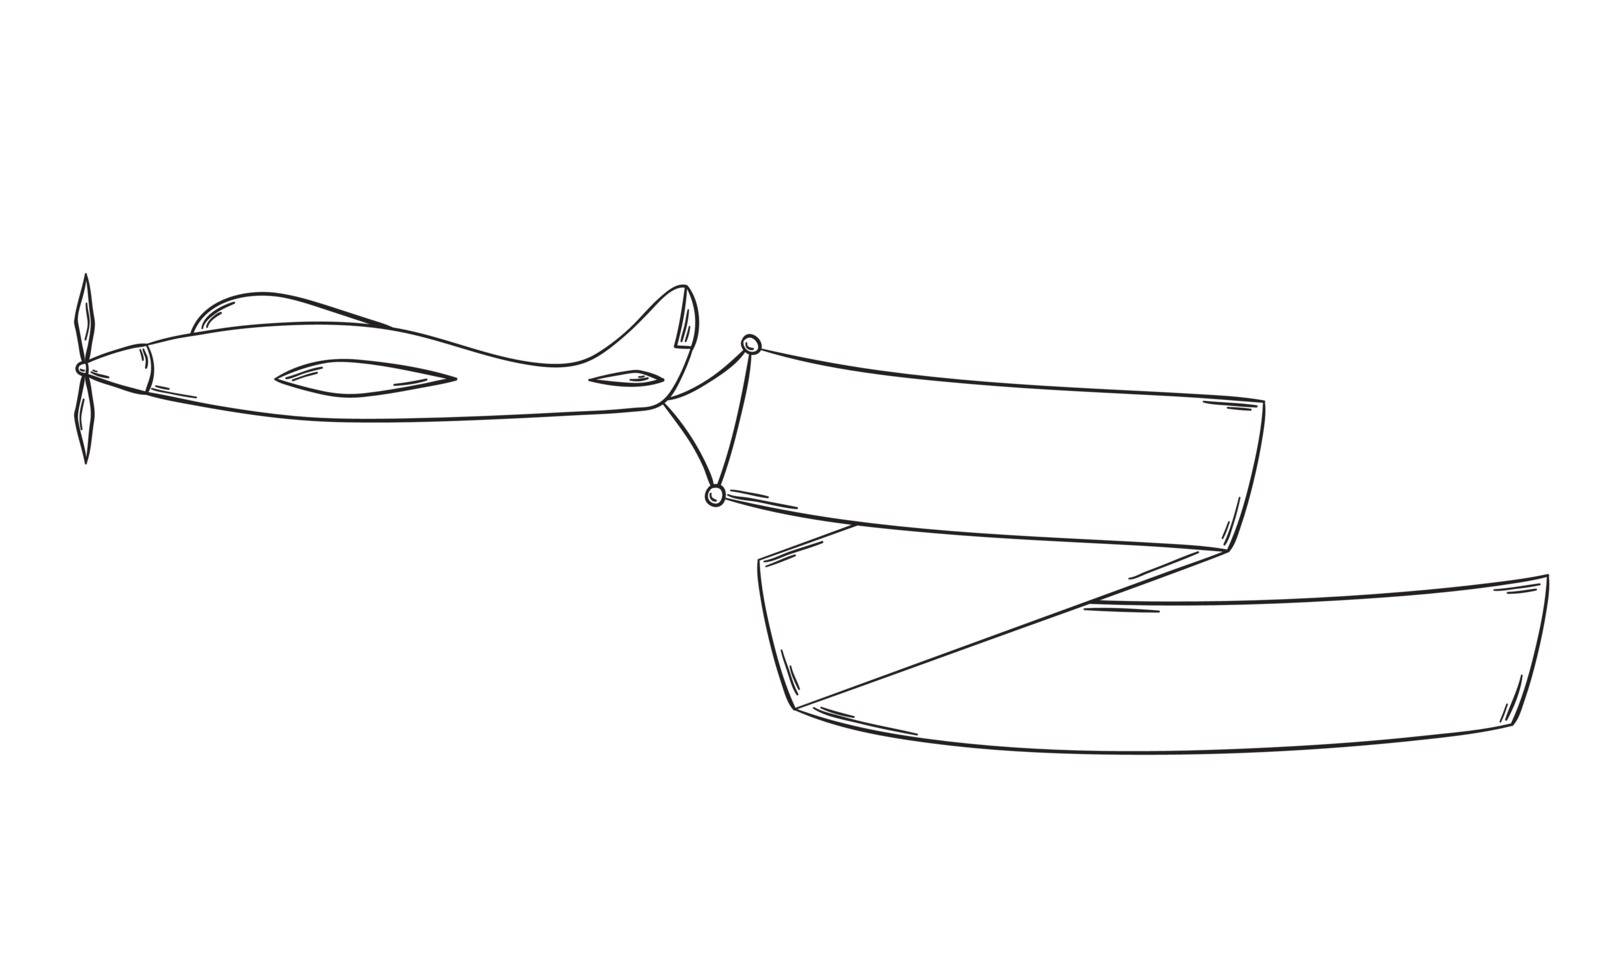 Sketch of the plane with blank advertising flag or banner isolated on white background.